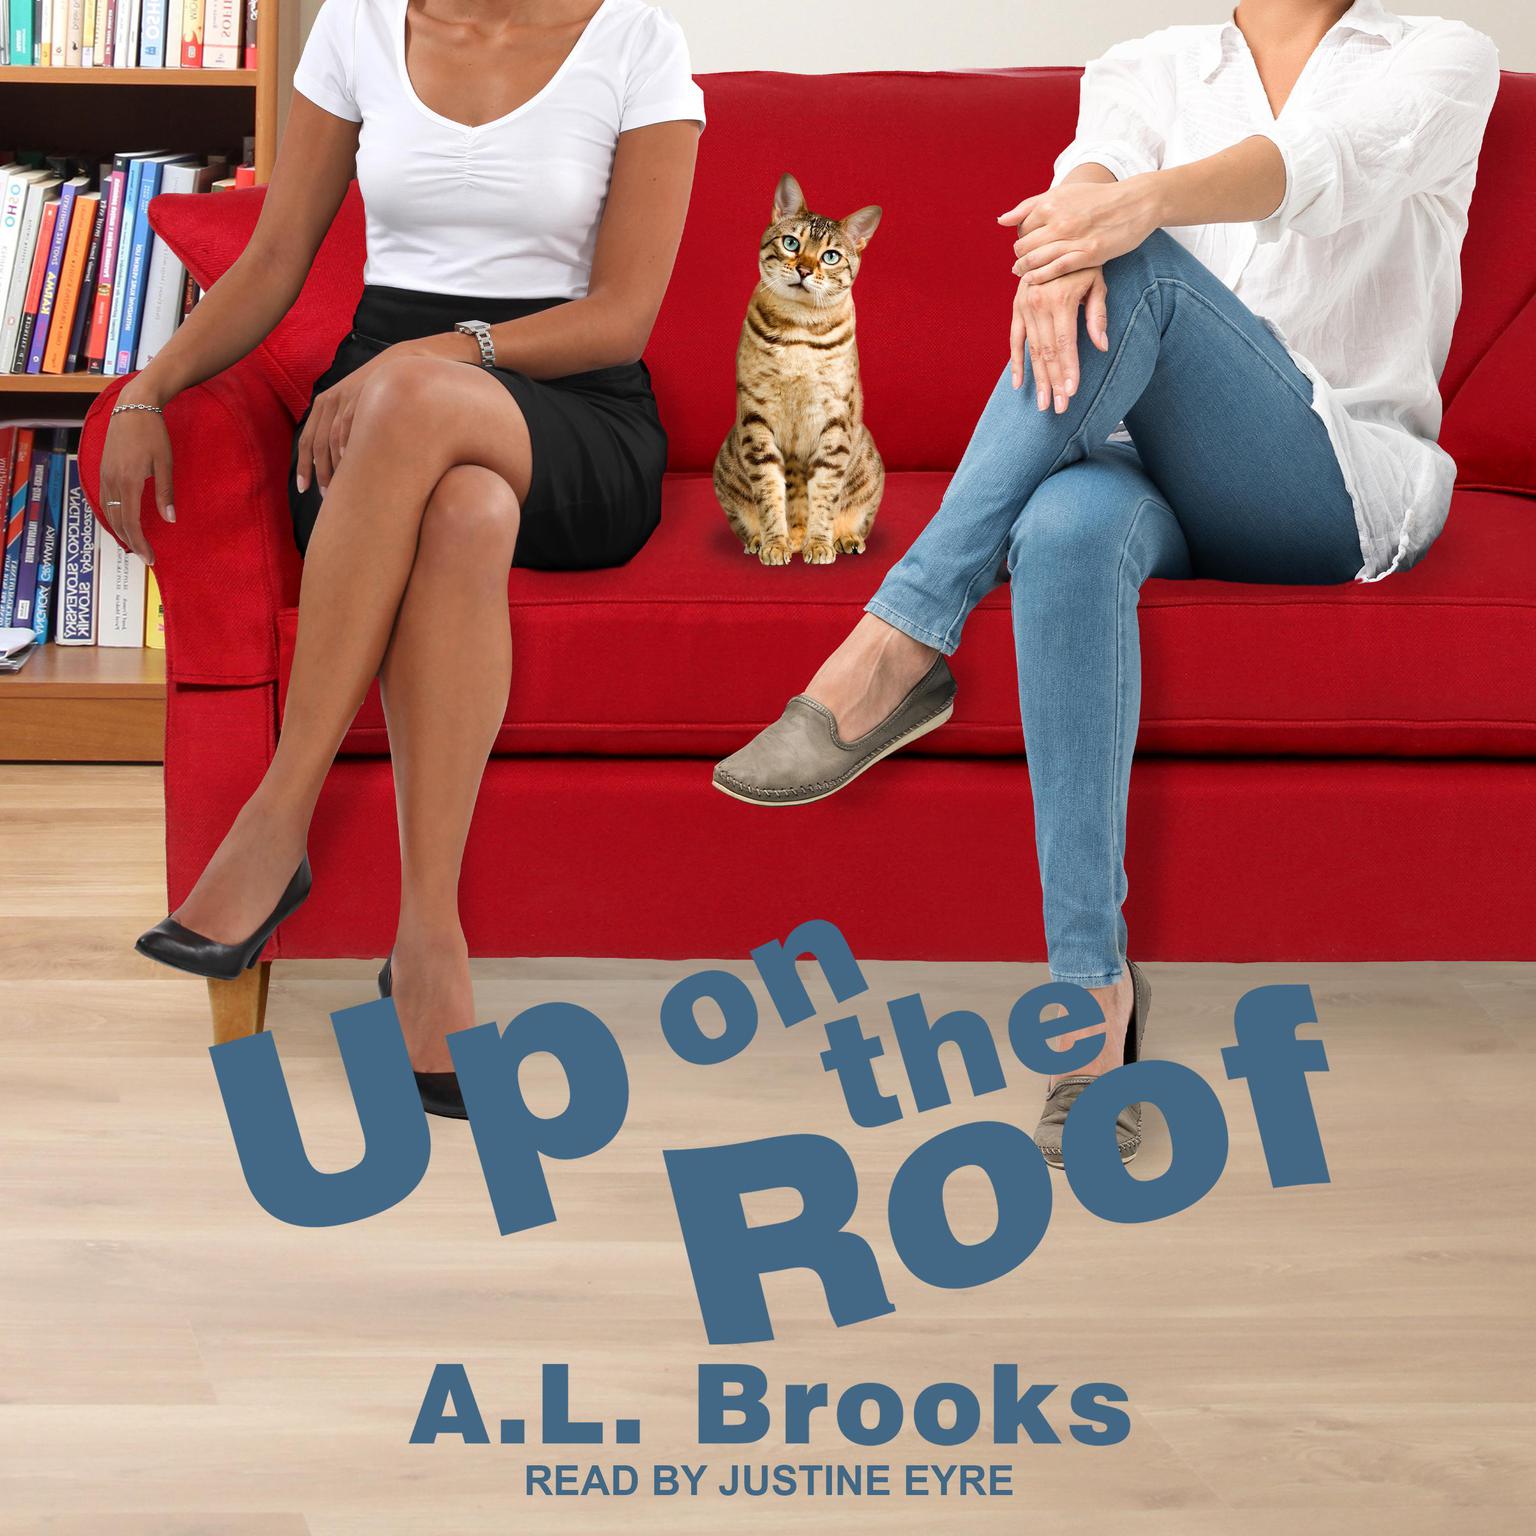 Justine Eyre, A.L. Brooks: Up on the Roof (AudiobookFormat, 2018, Ylva)